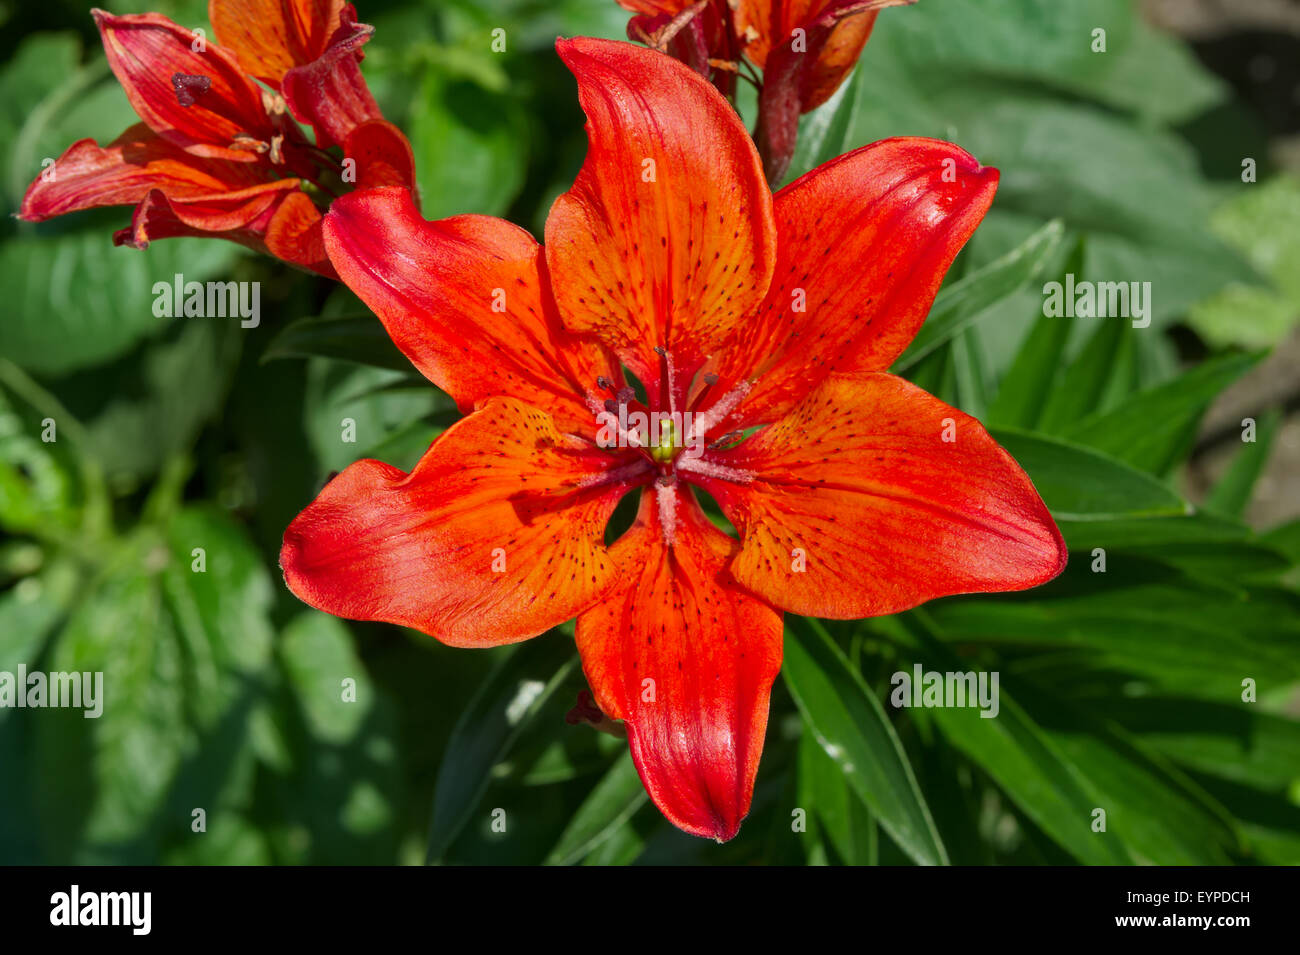 Red lily flowers blooming in the garden. Stock Photo